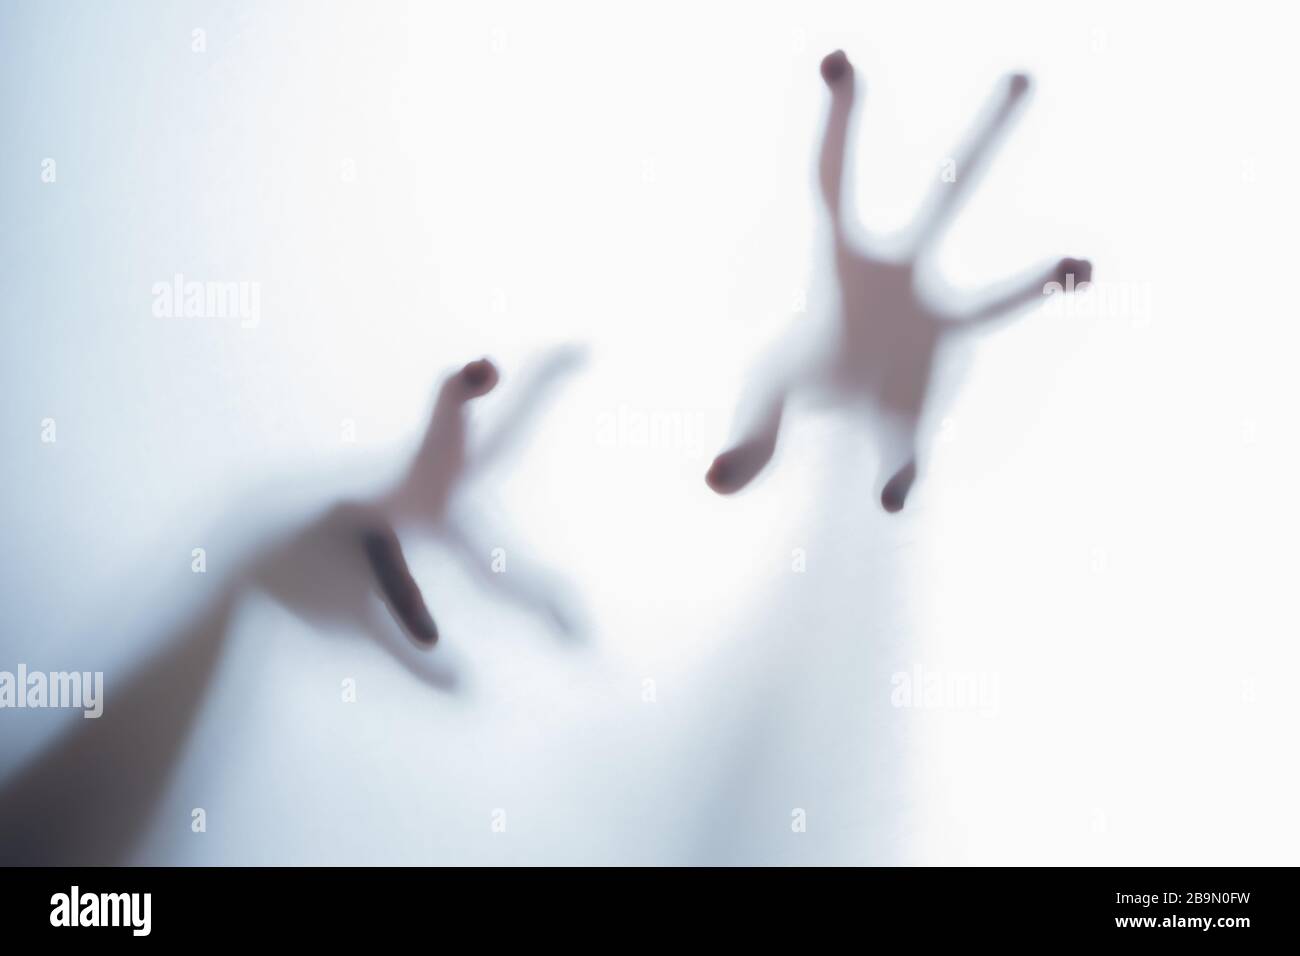 Shadow of blurred creepy fingers from an unknown creature like an alien. Stock Photo